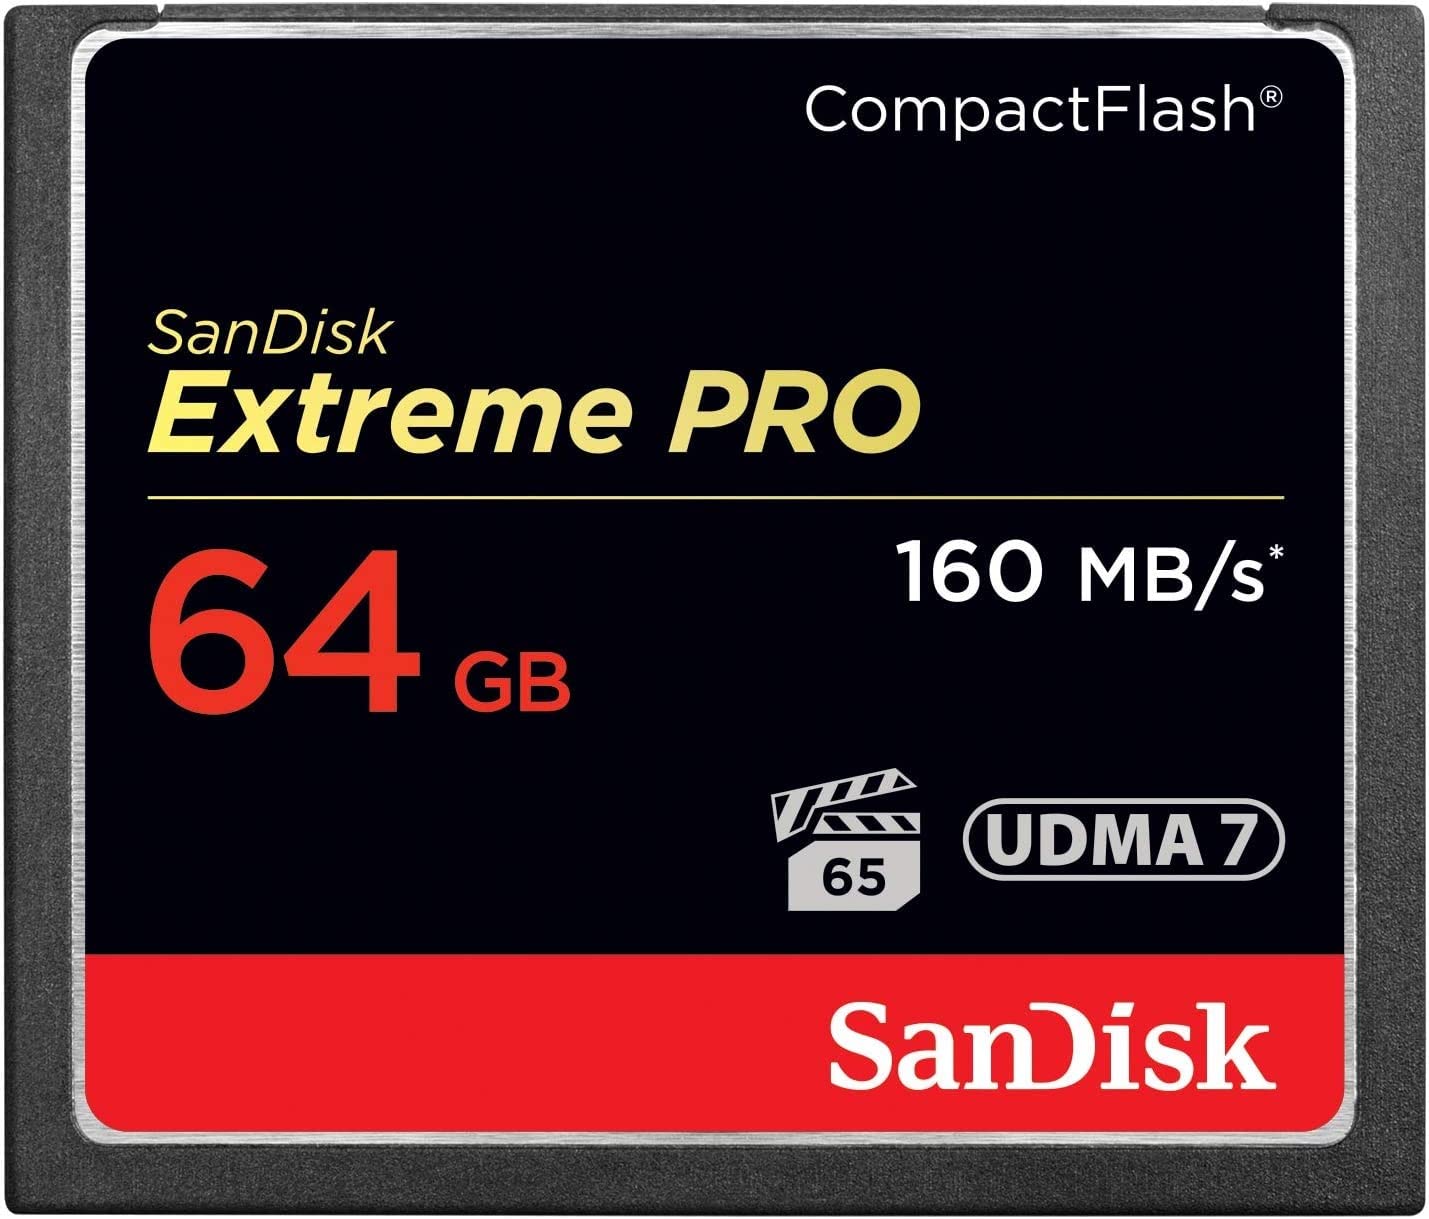 Compact Flash Extreme Pro 64gb Sandisk Sdcfxps 064g X46 619659102463